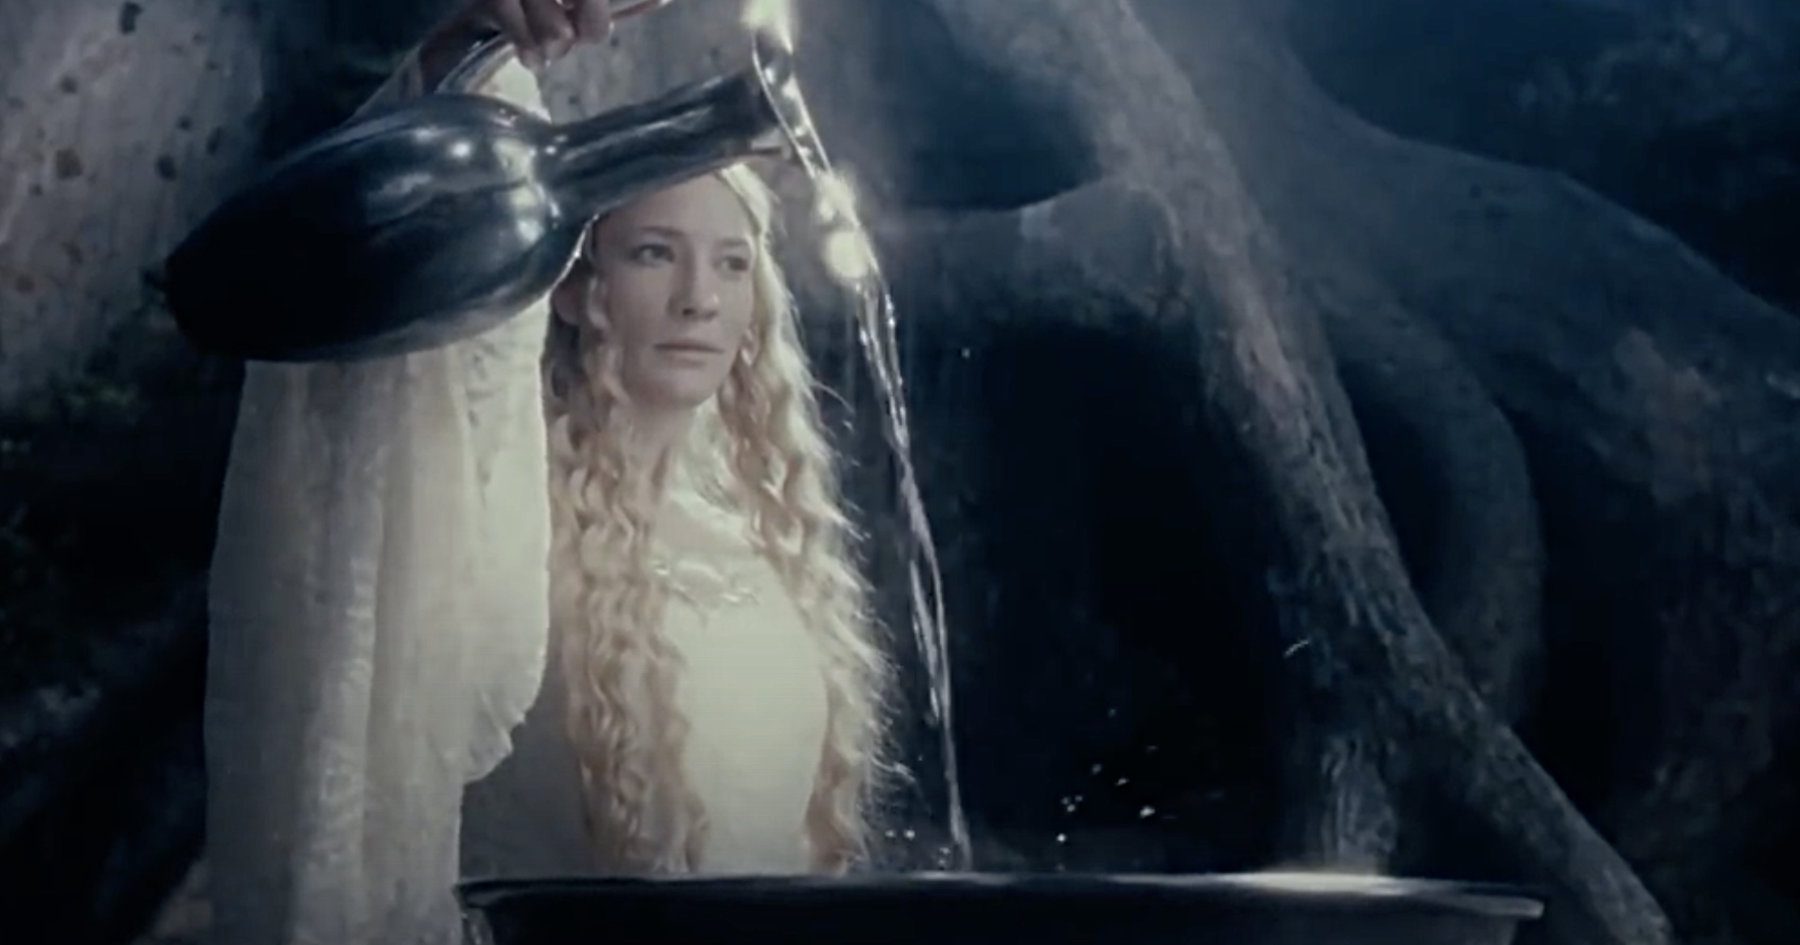 galadriel using the mirror that allows her to see the future